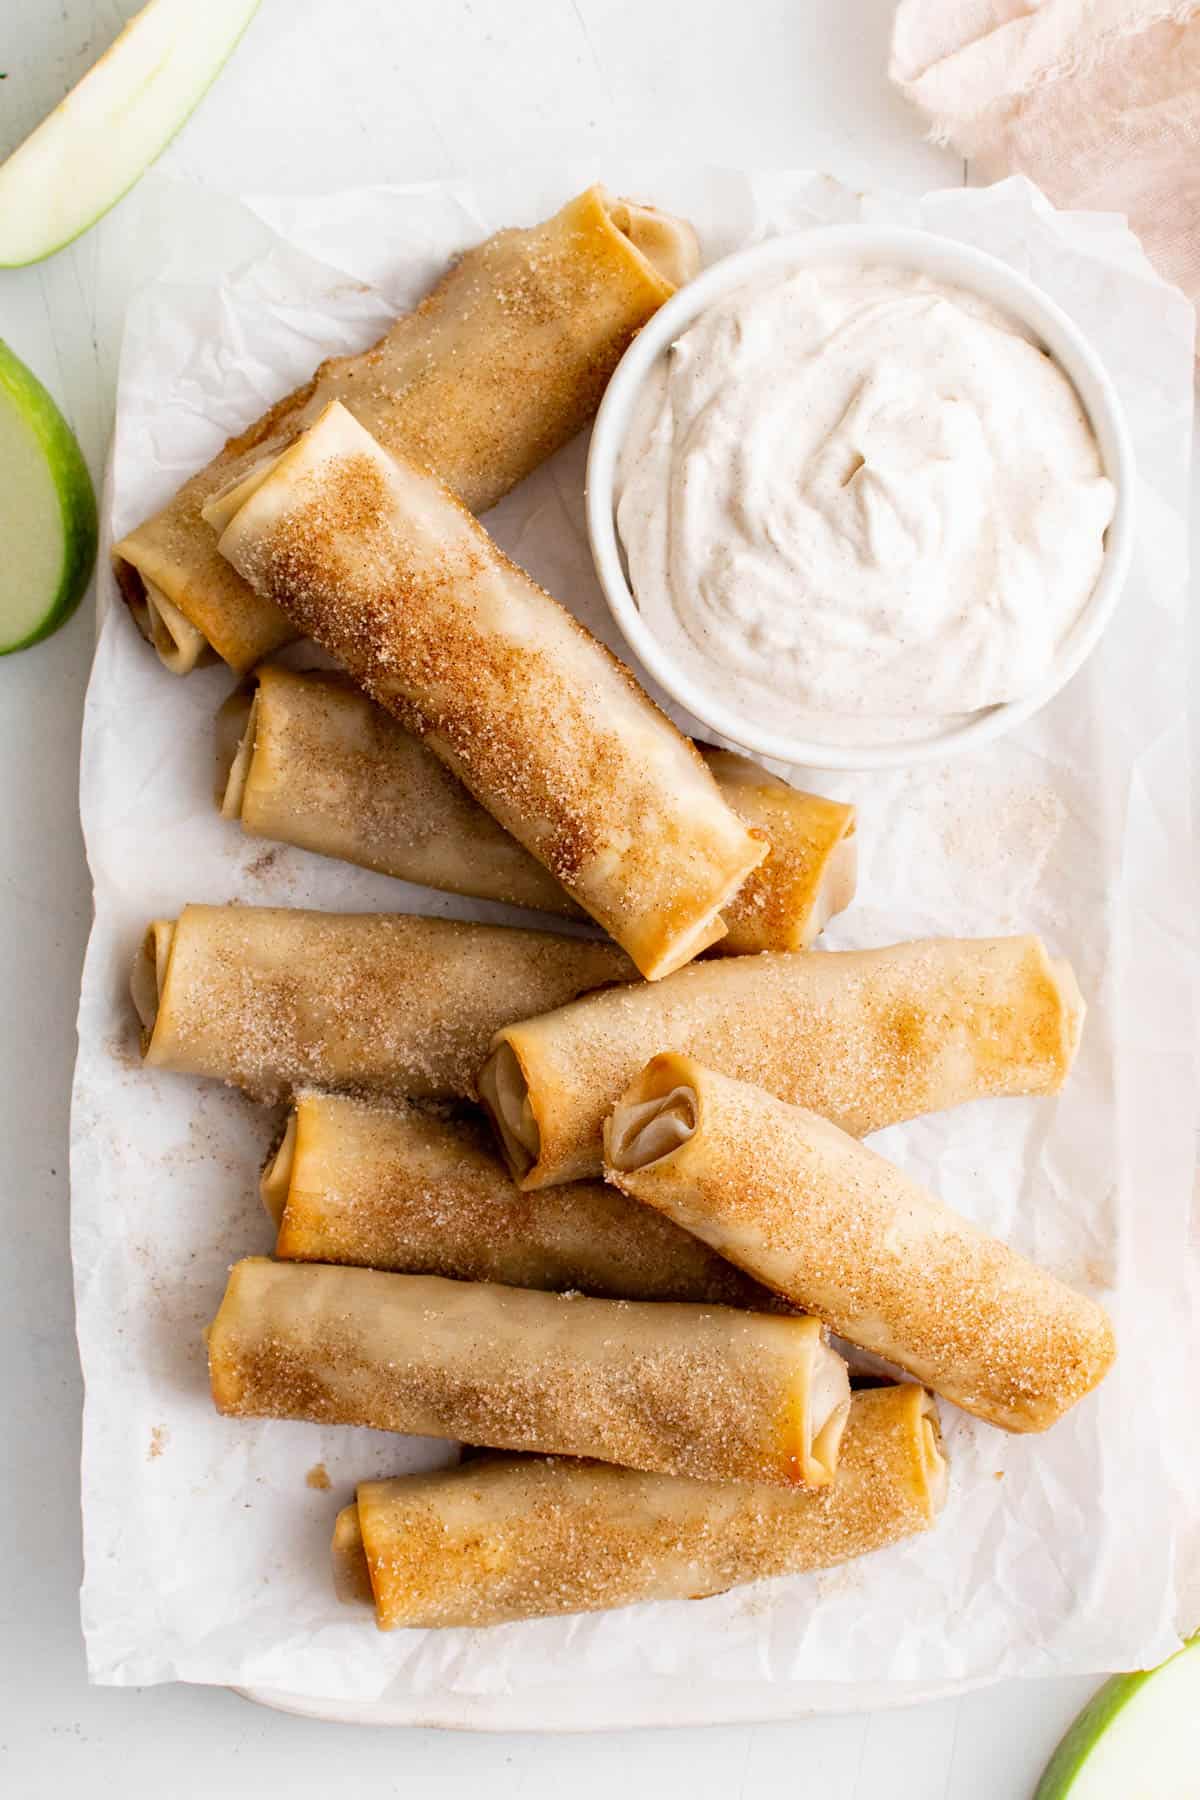 All of the baked apple pie egg rolls on a piece of parchment paper. The cinnamon whipped cream is sitting in a bowl next to the egg rolls.